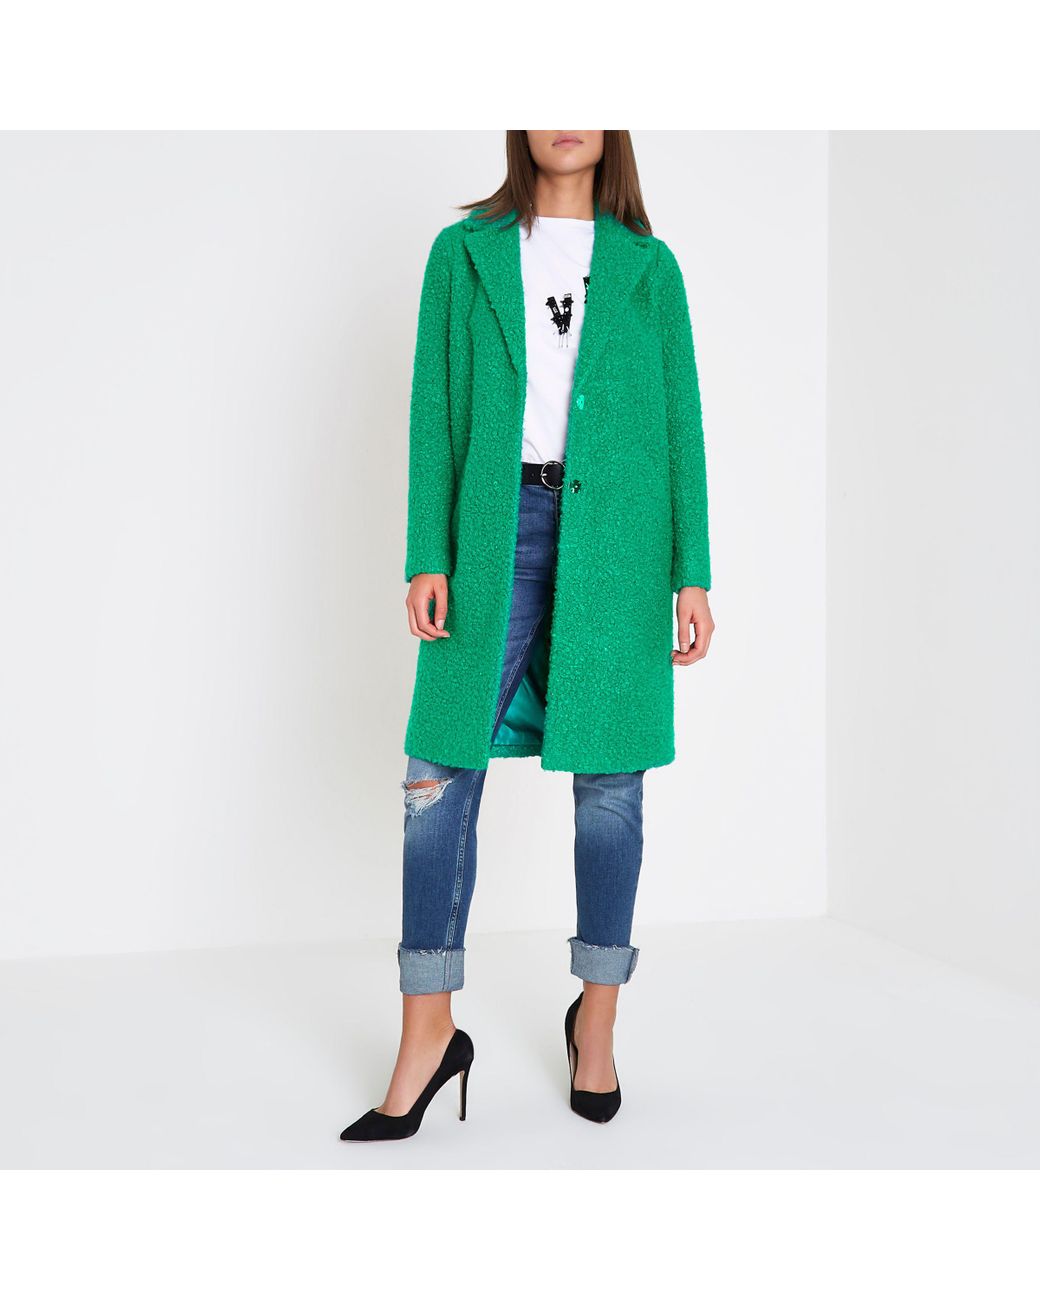 River Island Boucle Coat in Green | Lyst